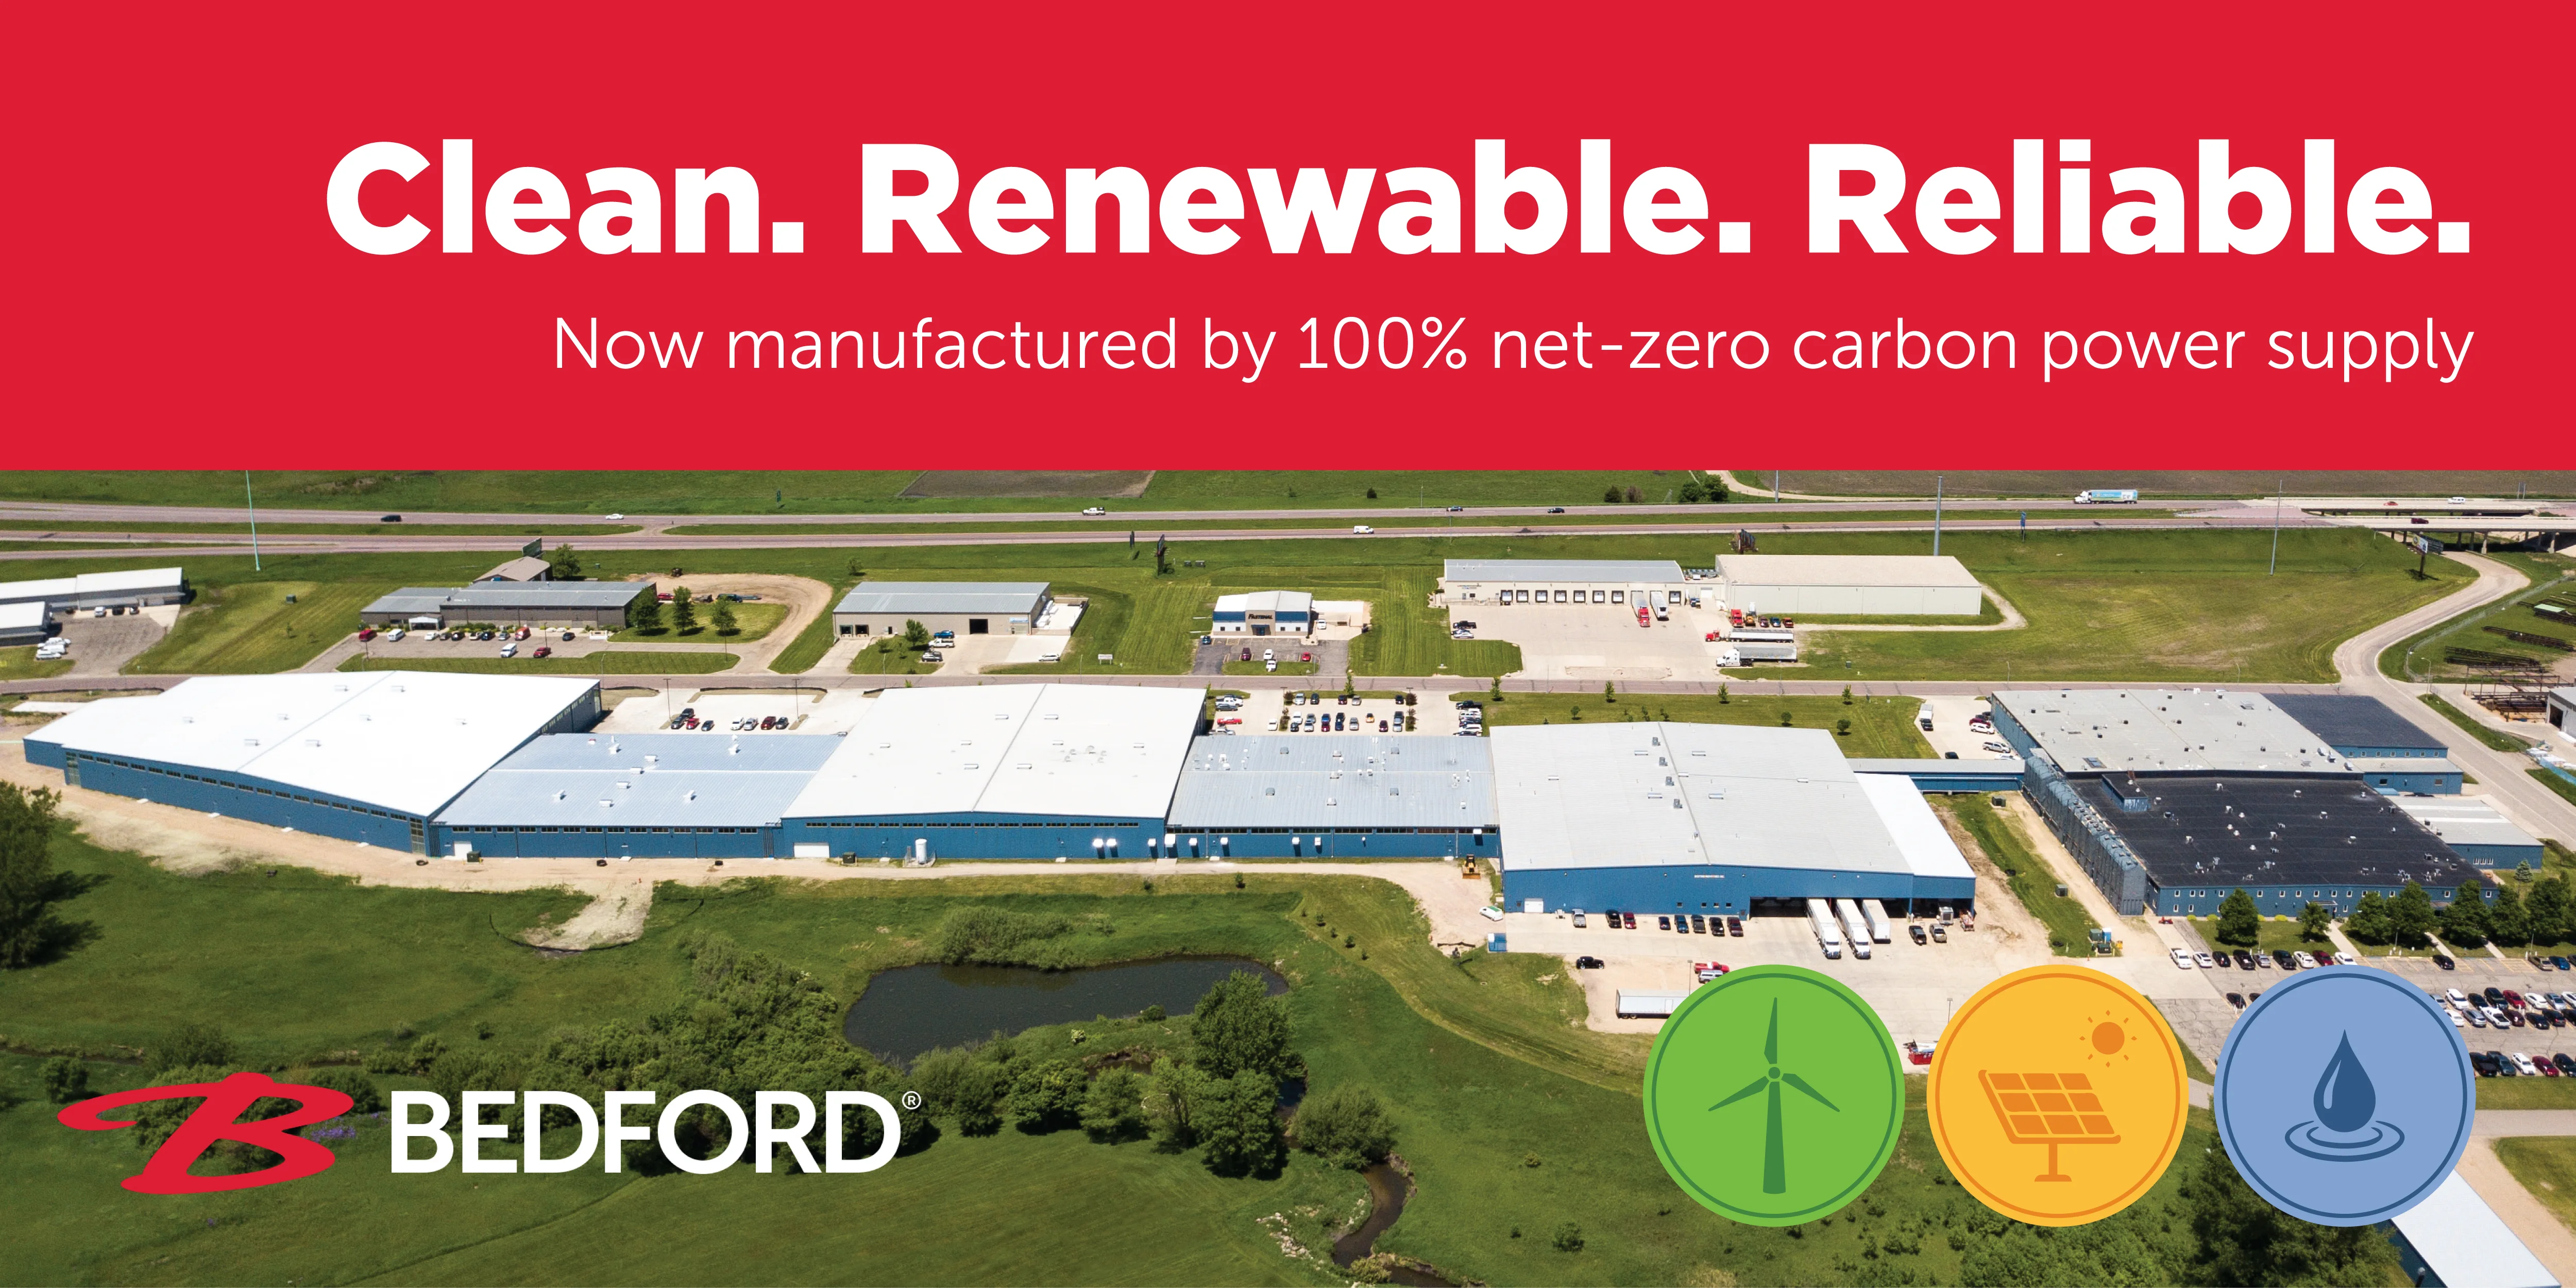 Aerial view of Bedford Industries’ manufacturing facility powered by net-zero carbon power supply